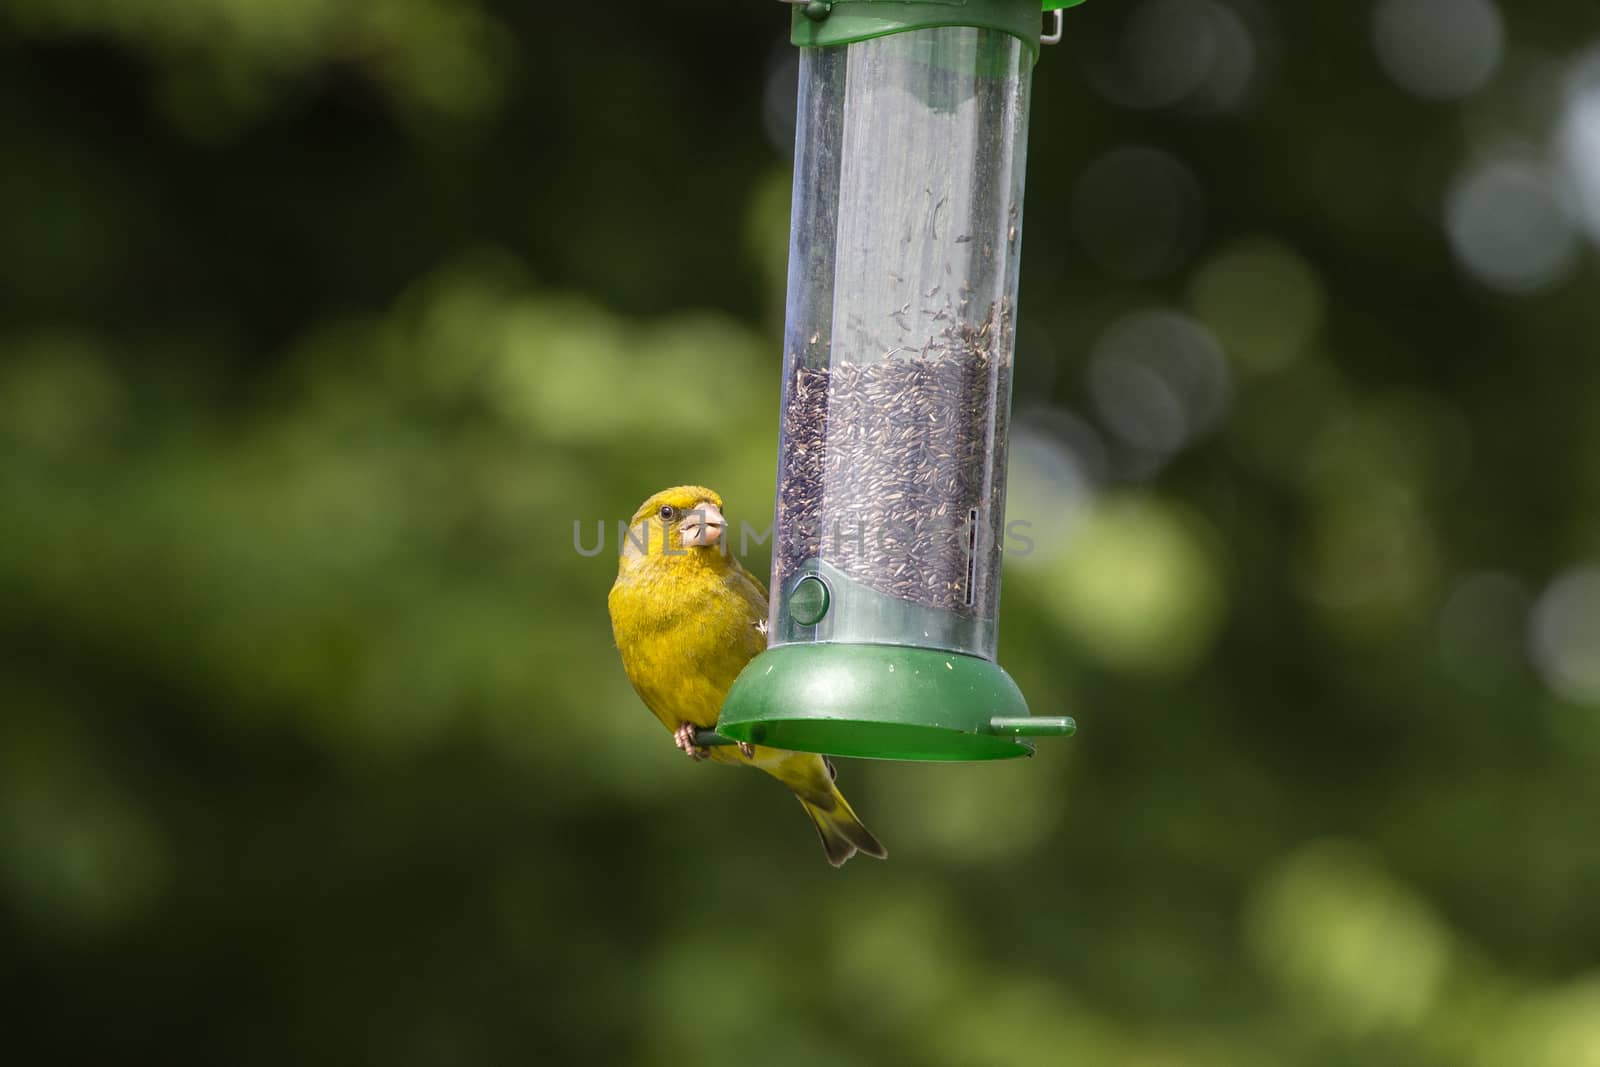 Greenfinch (Carduelis Chloris) feeding on nyjer seed from a feeder